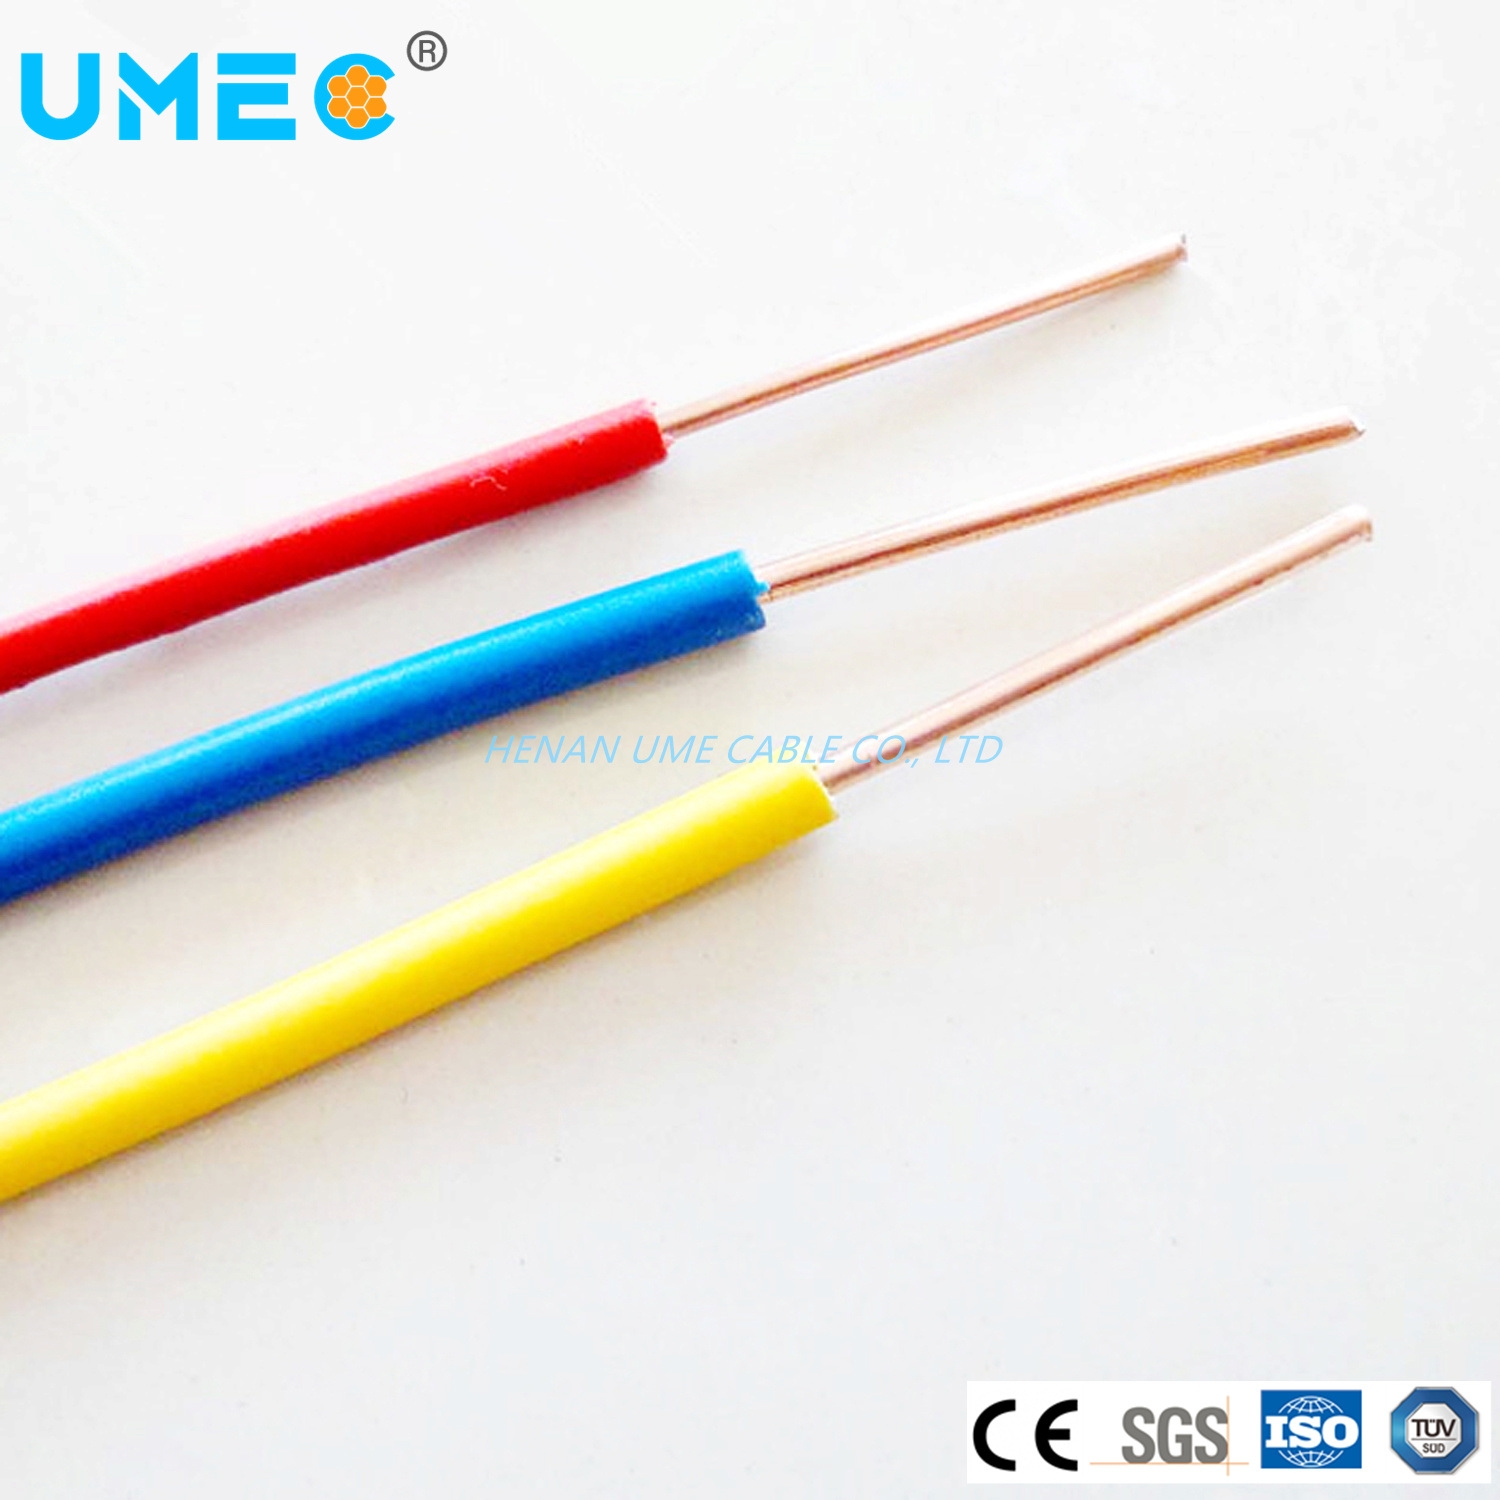 Copper Conductor PVC Insulated Electrical Wire for Household BV